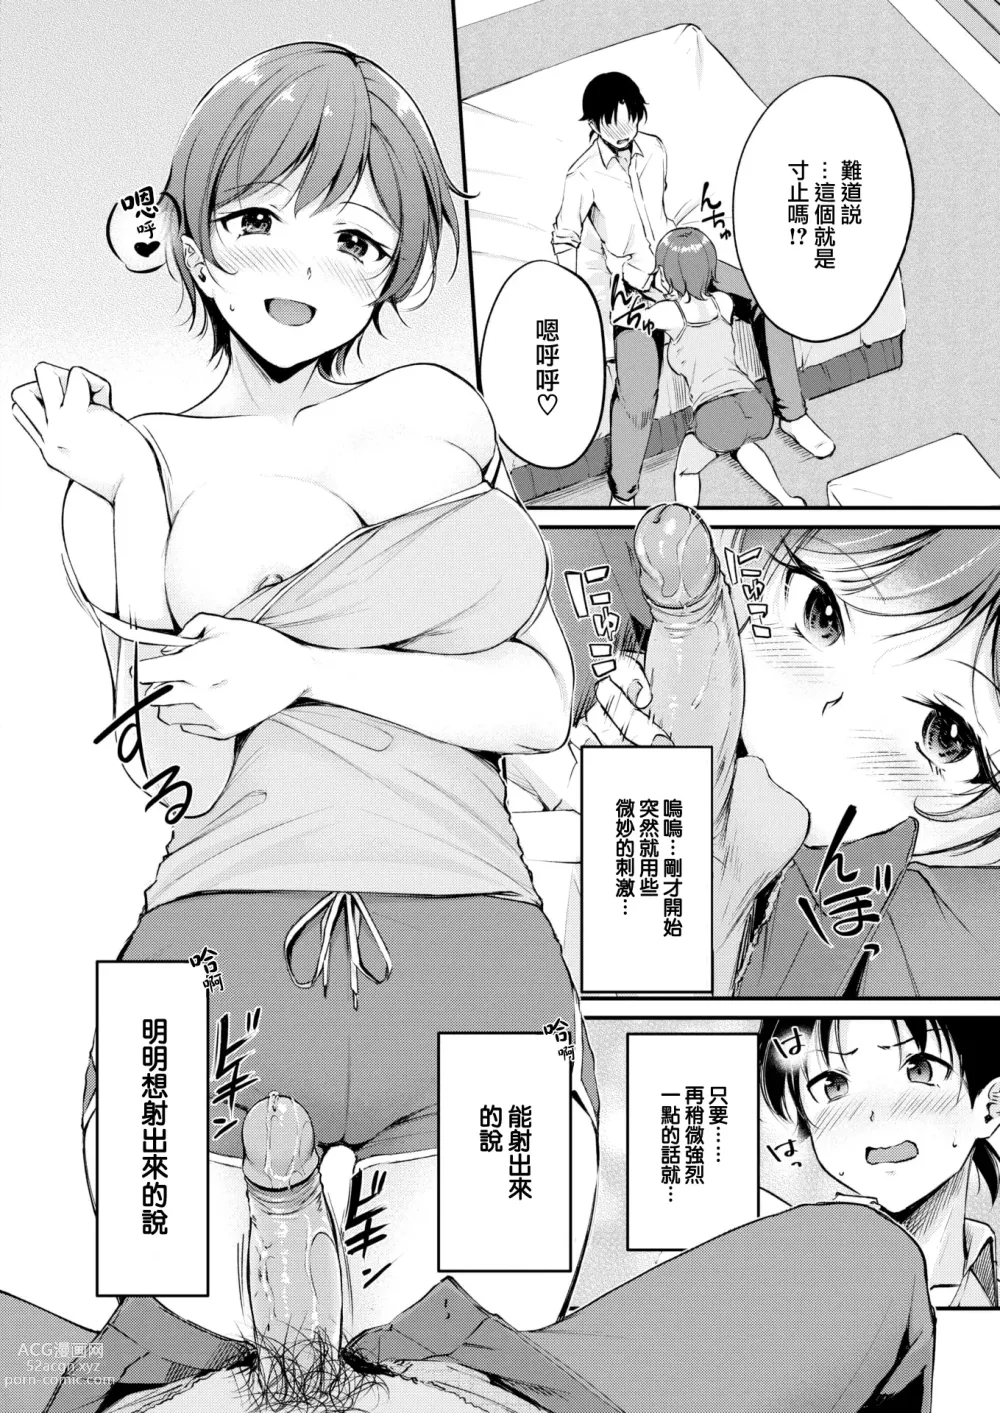 Page 13 of doujinshi えっちは謎解きのあとで